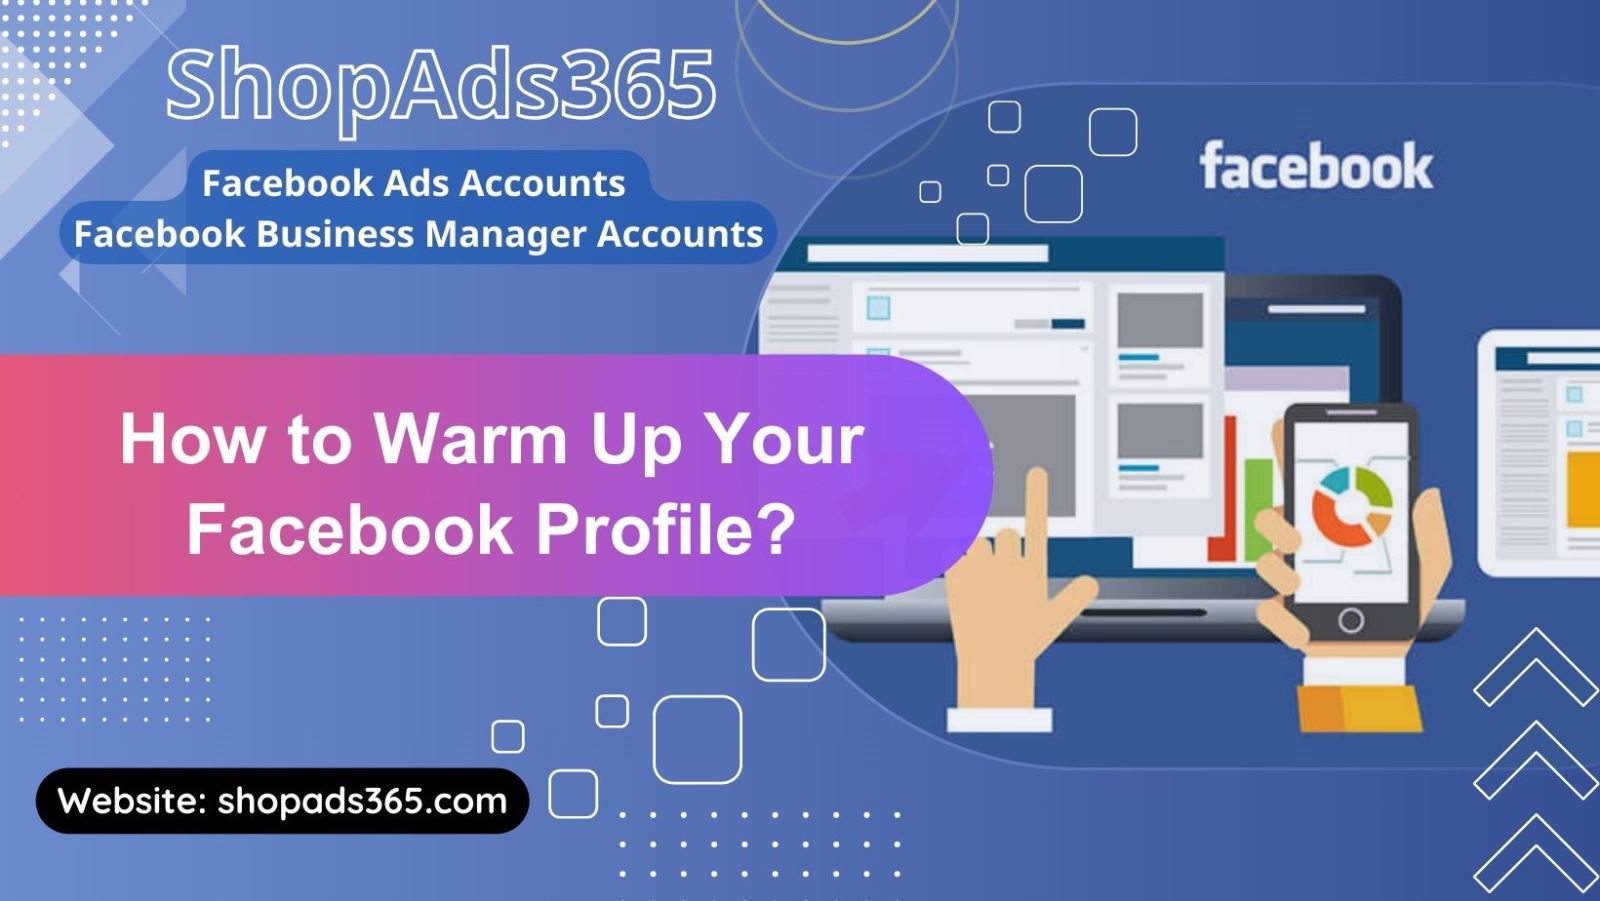 How to Warm Up Your Facebook Profile